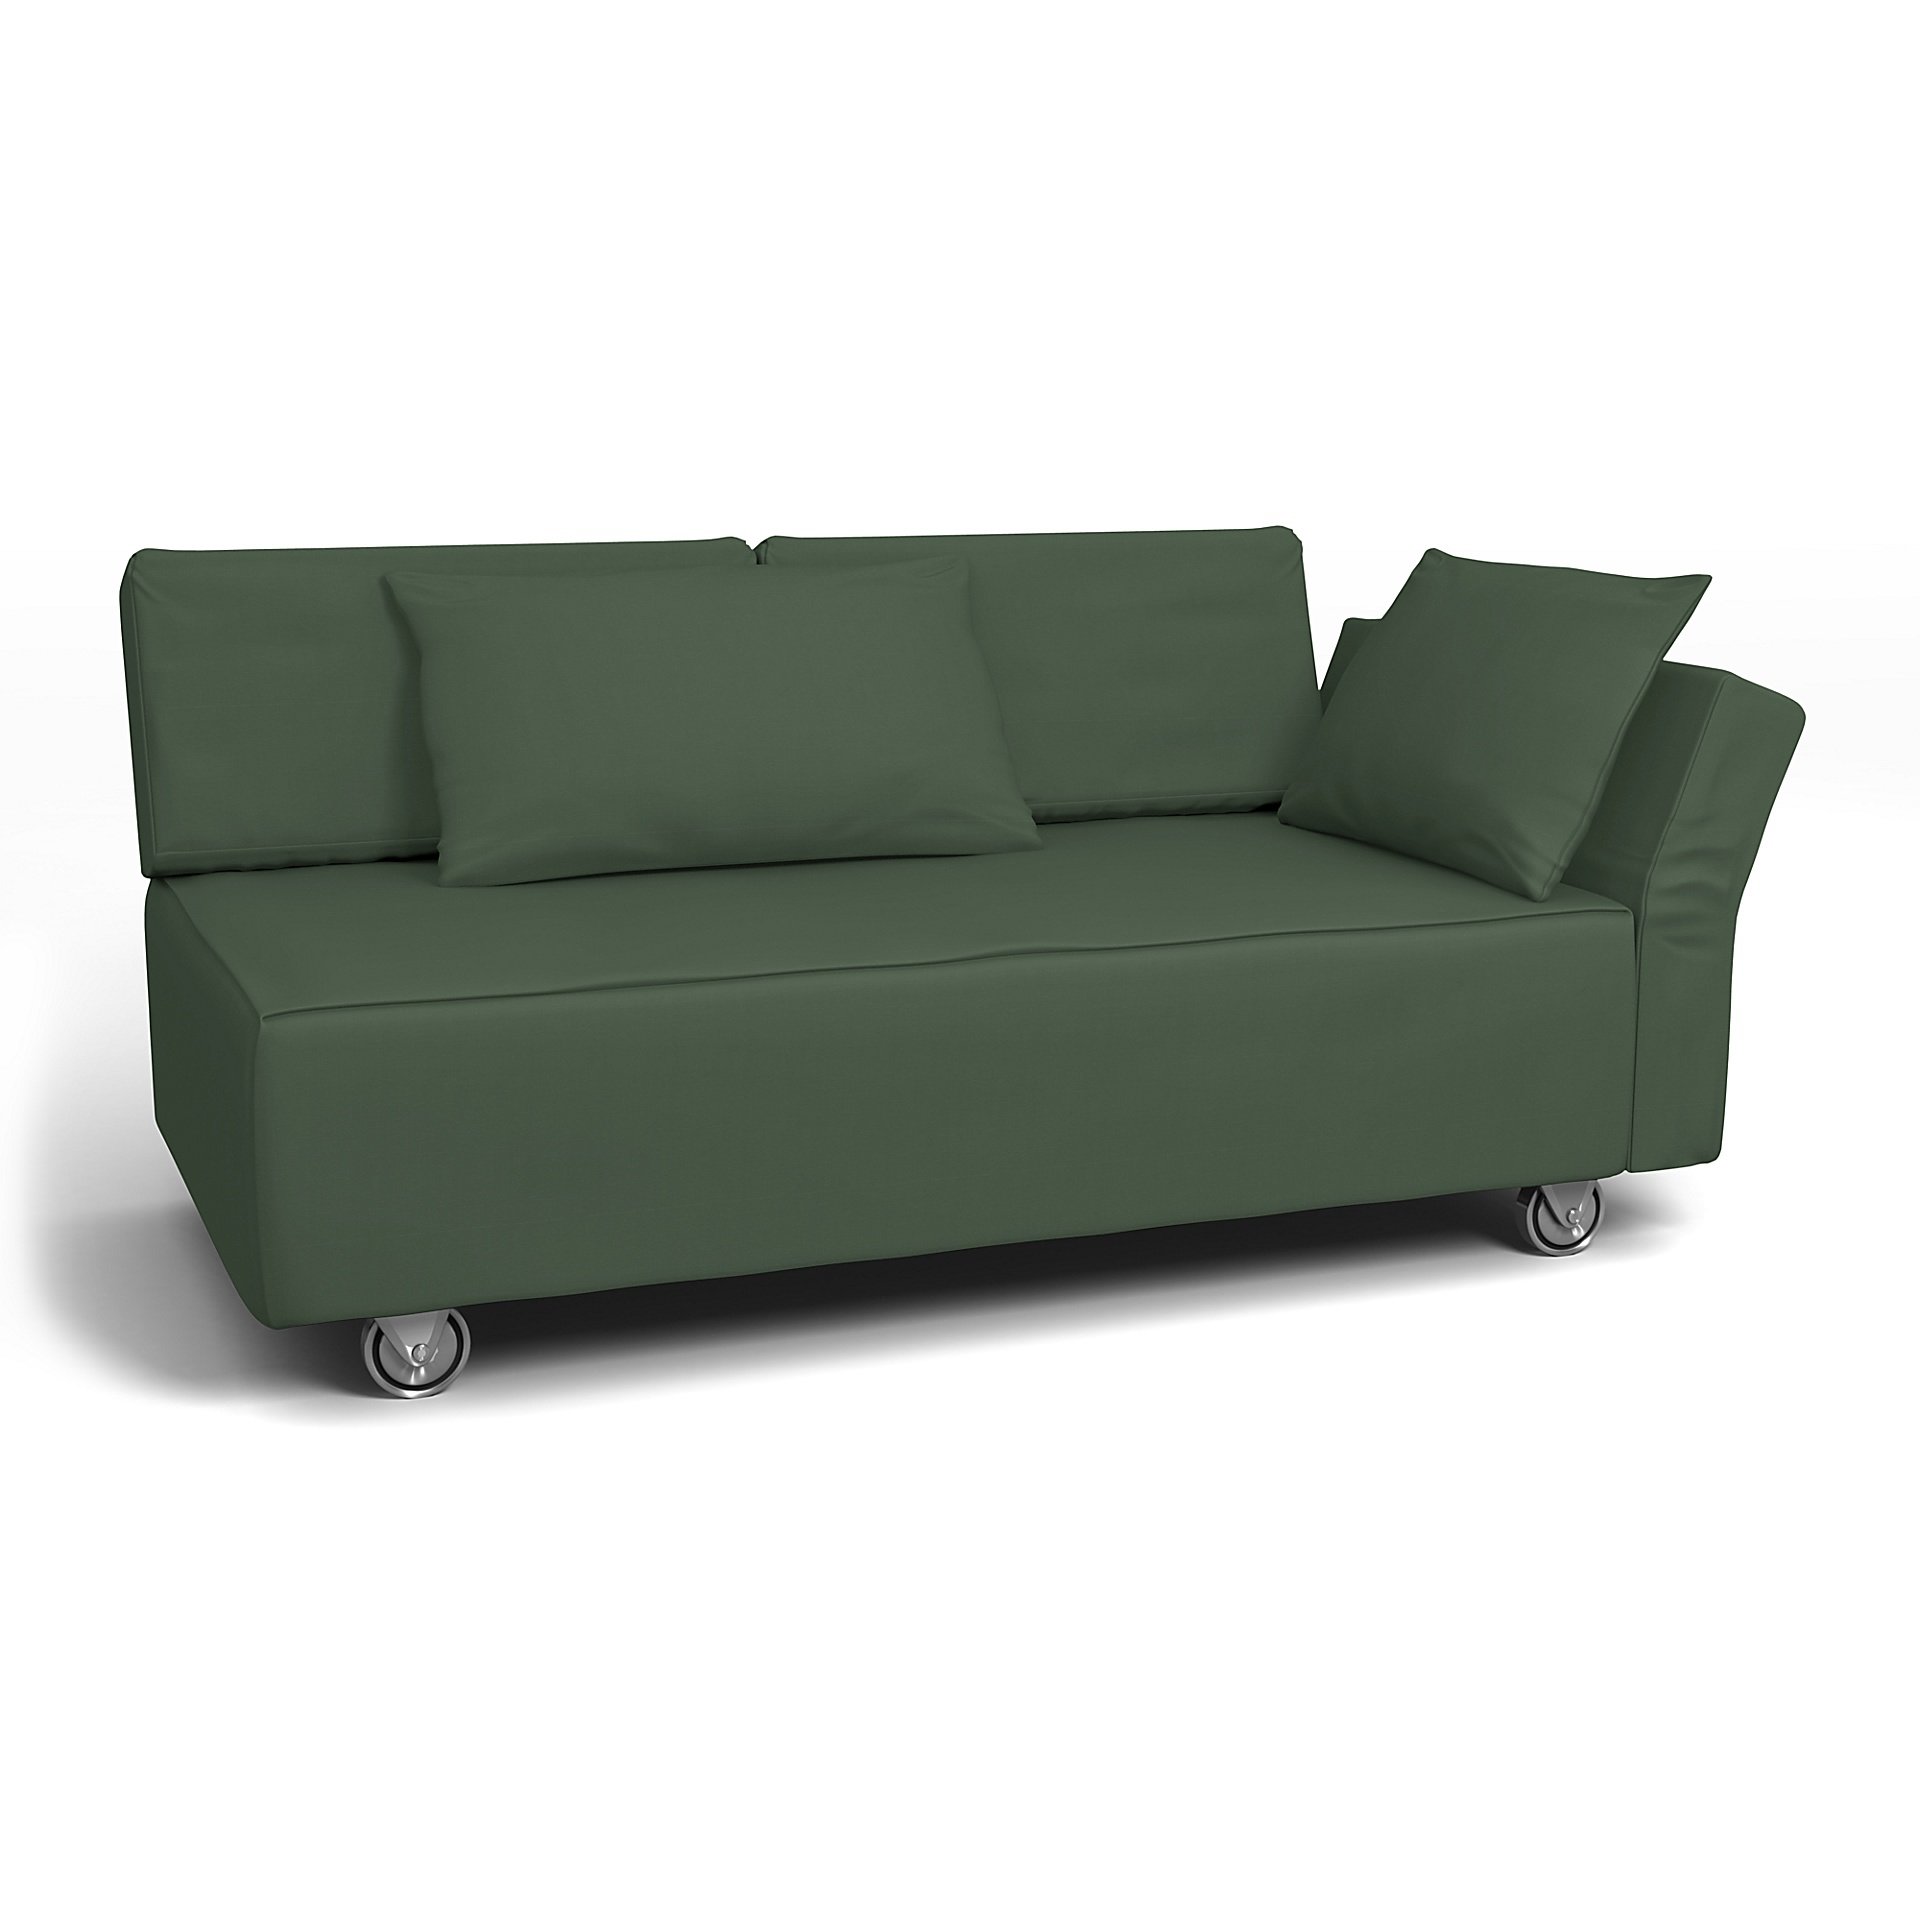 IKEA - Falsterbo 2 Seat Sofa with Right Arm Cover, Thyme, Cotton - Bemz